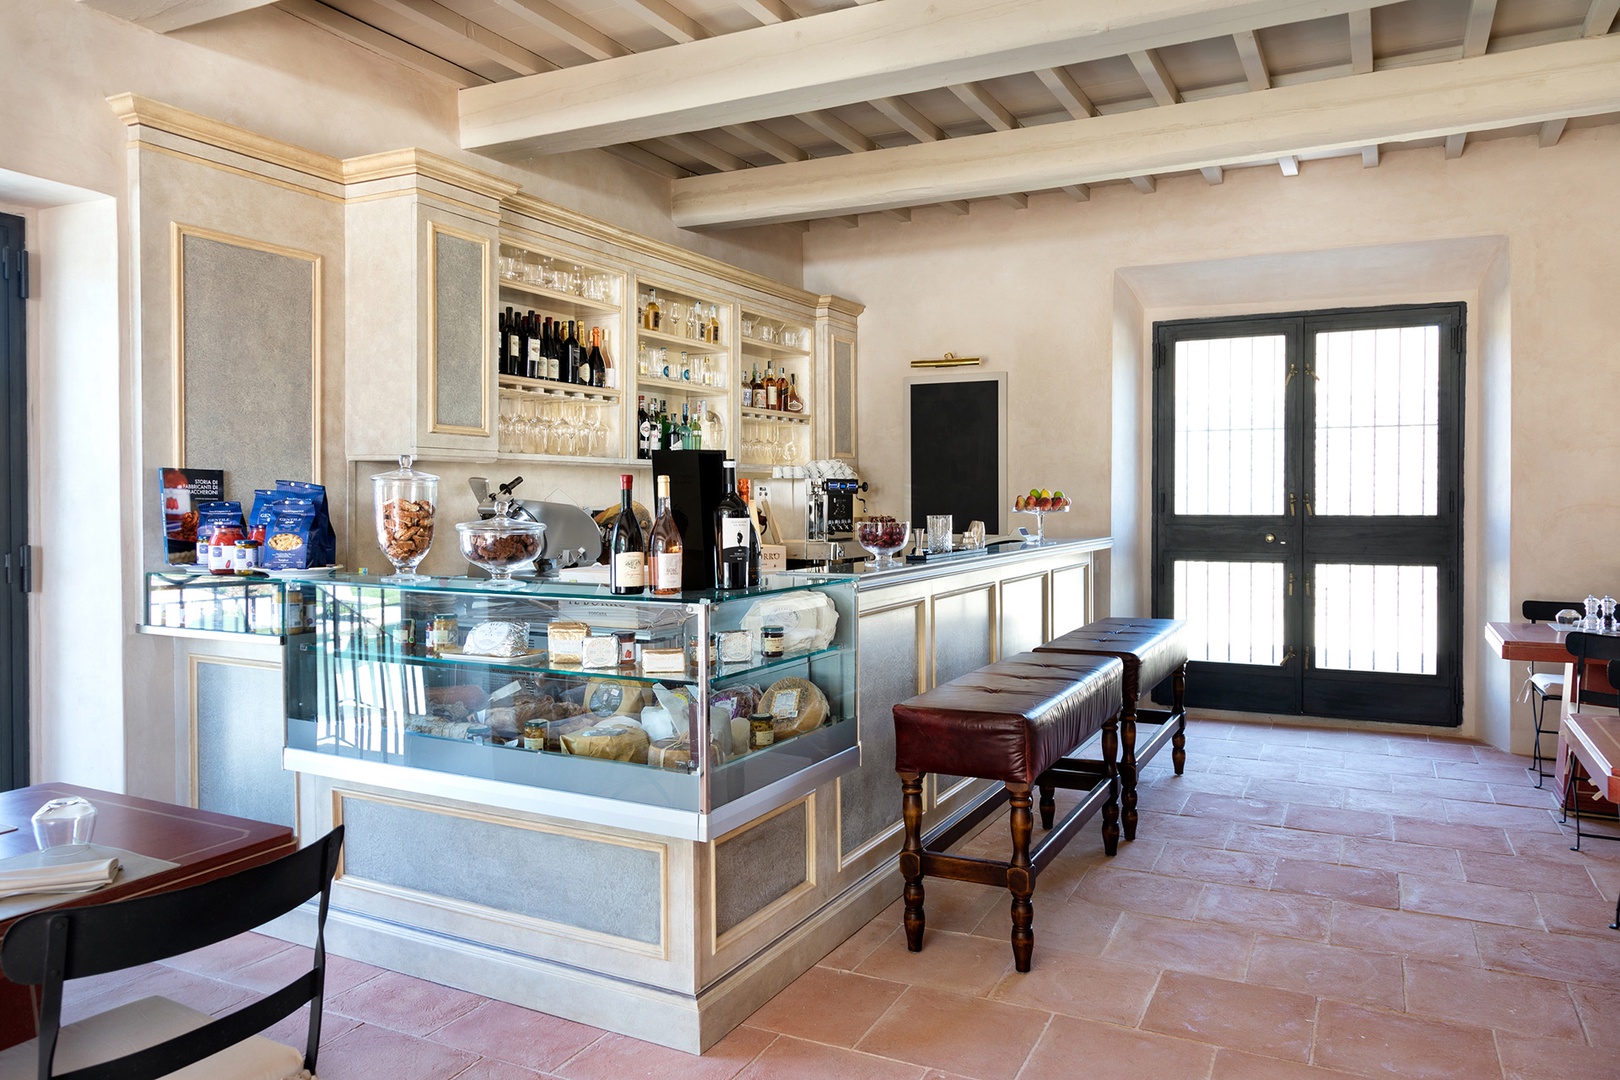 The on-site bistro serves delicious Tuscan specialties in a casual atmosphere. The shop offers local